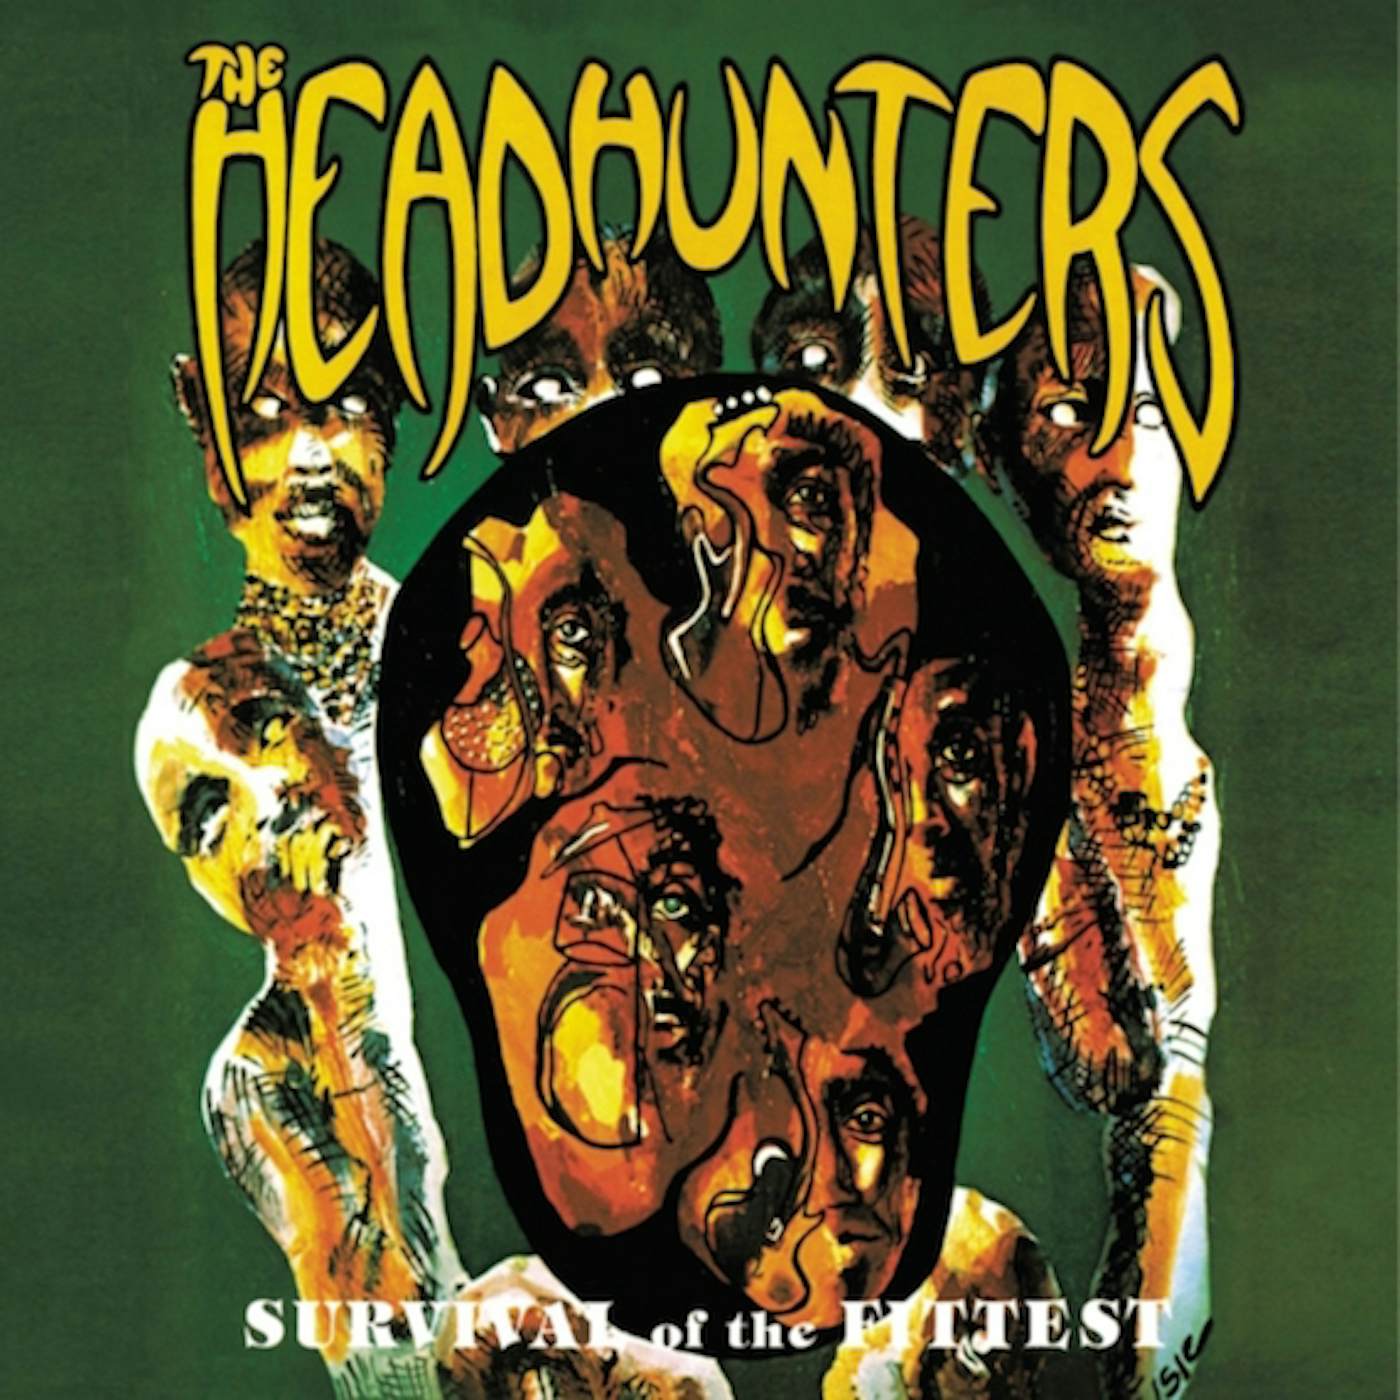 Headhunters Survival Of The Fittest Vinyl Record